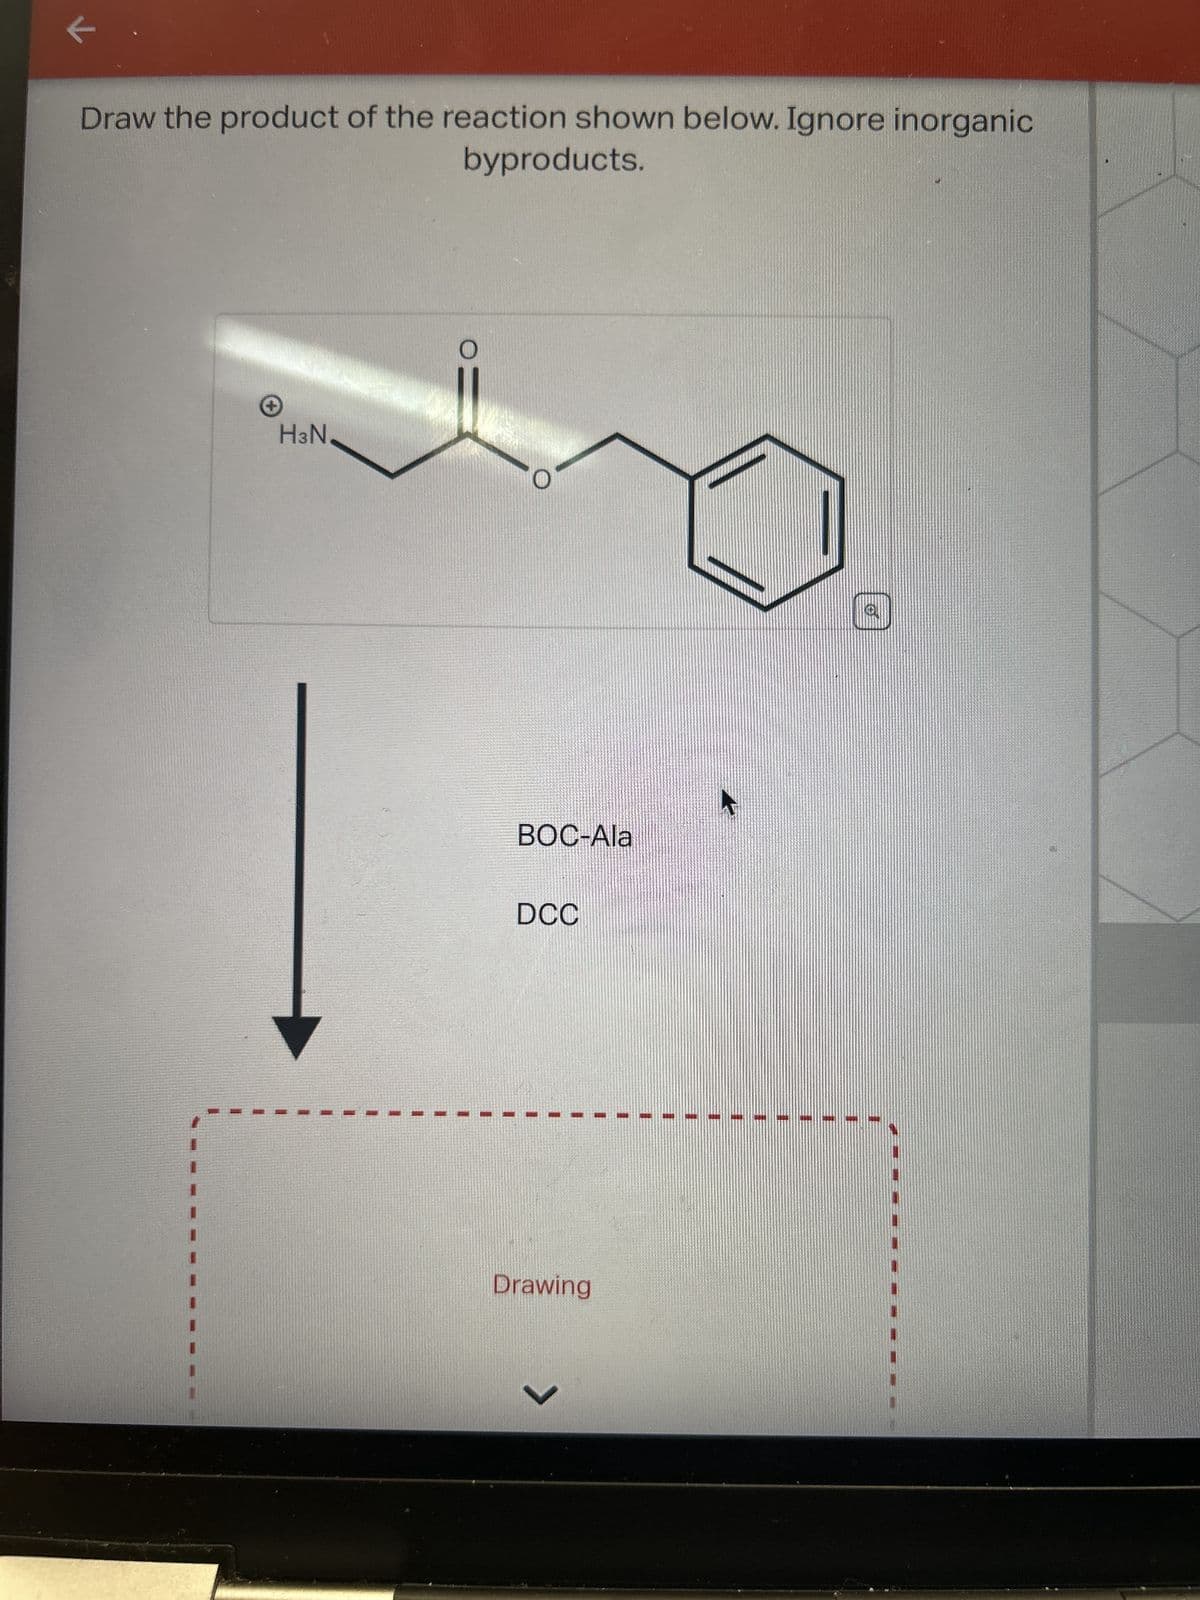 K
Draw the product of the reaction shown below. Ignore inorganic
byproducts.
HзN.
BOC-Ala
DCC
Drawing
く